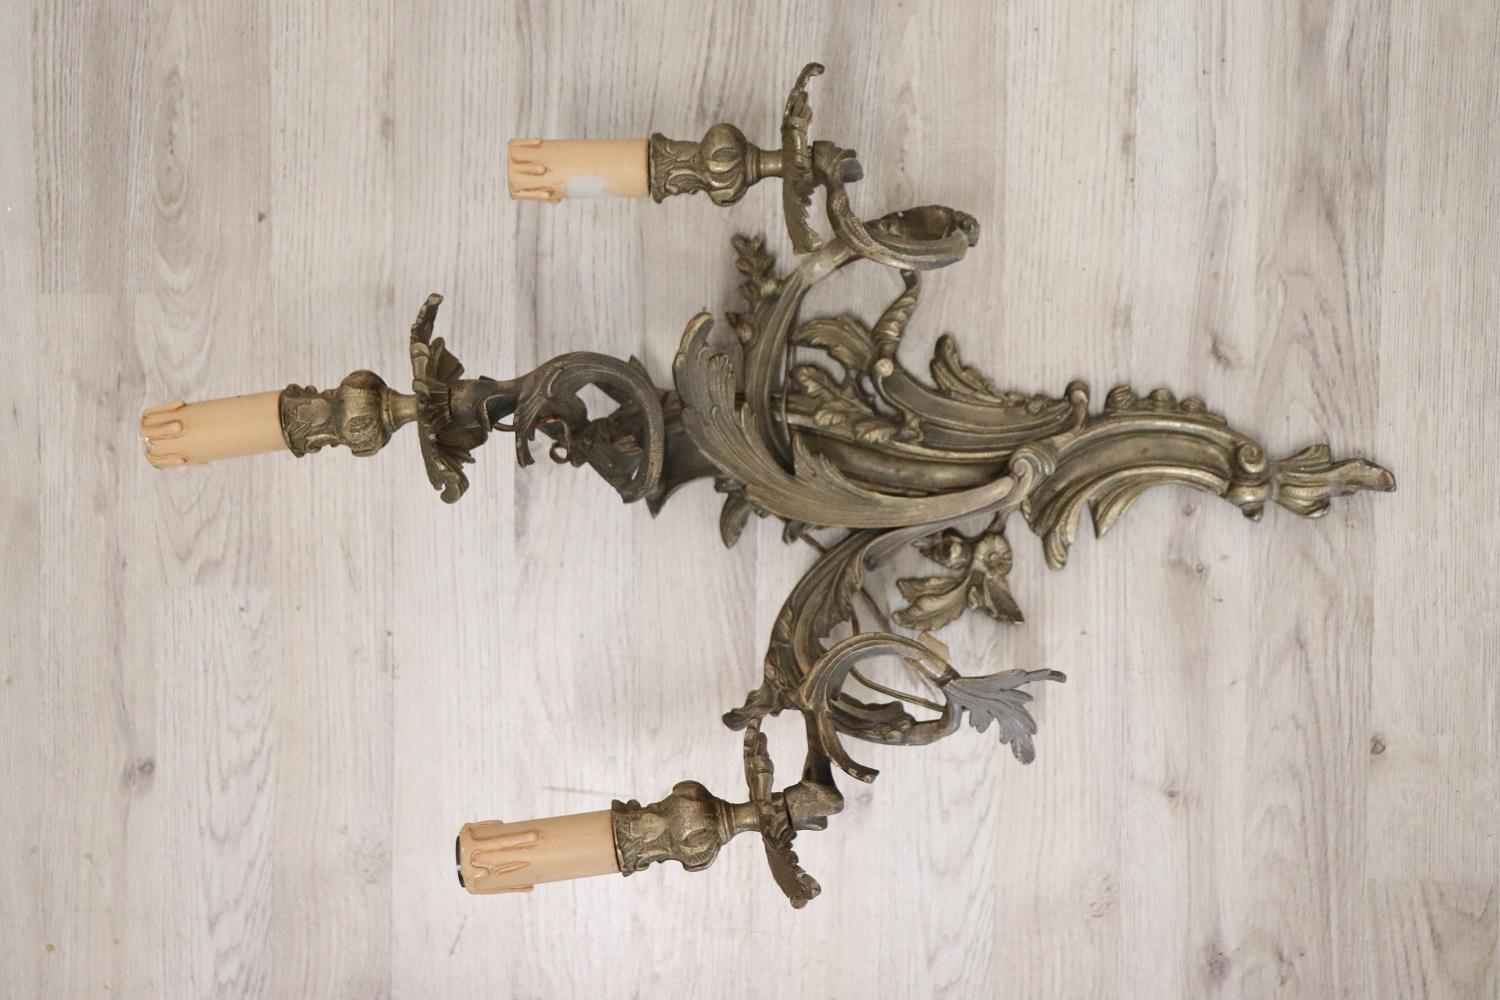 Beautiful and refined Italian circa 1890s pair of wall lights or sconces three lights. Made of golden bronze. Art Nouveau decoration with leaves that rise up in volutes and support the lights. Very decorative and large perfect for your wall. The